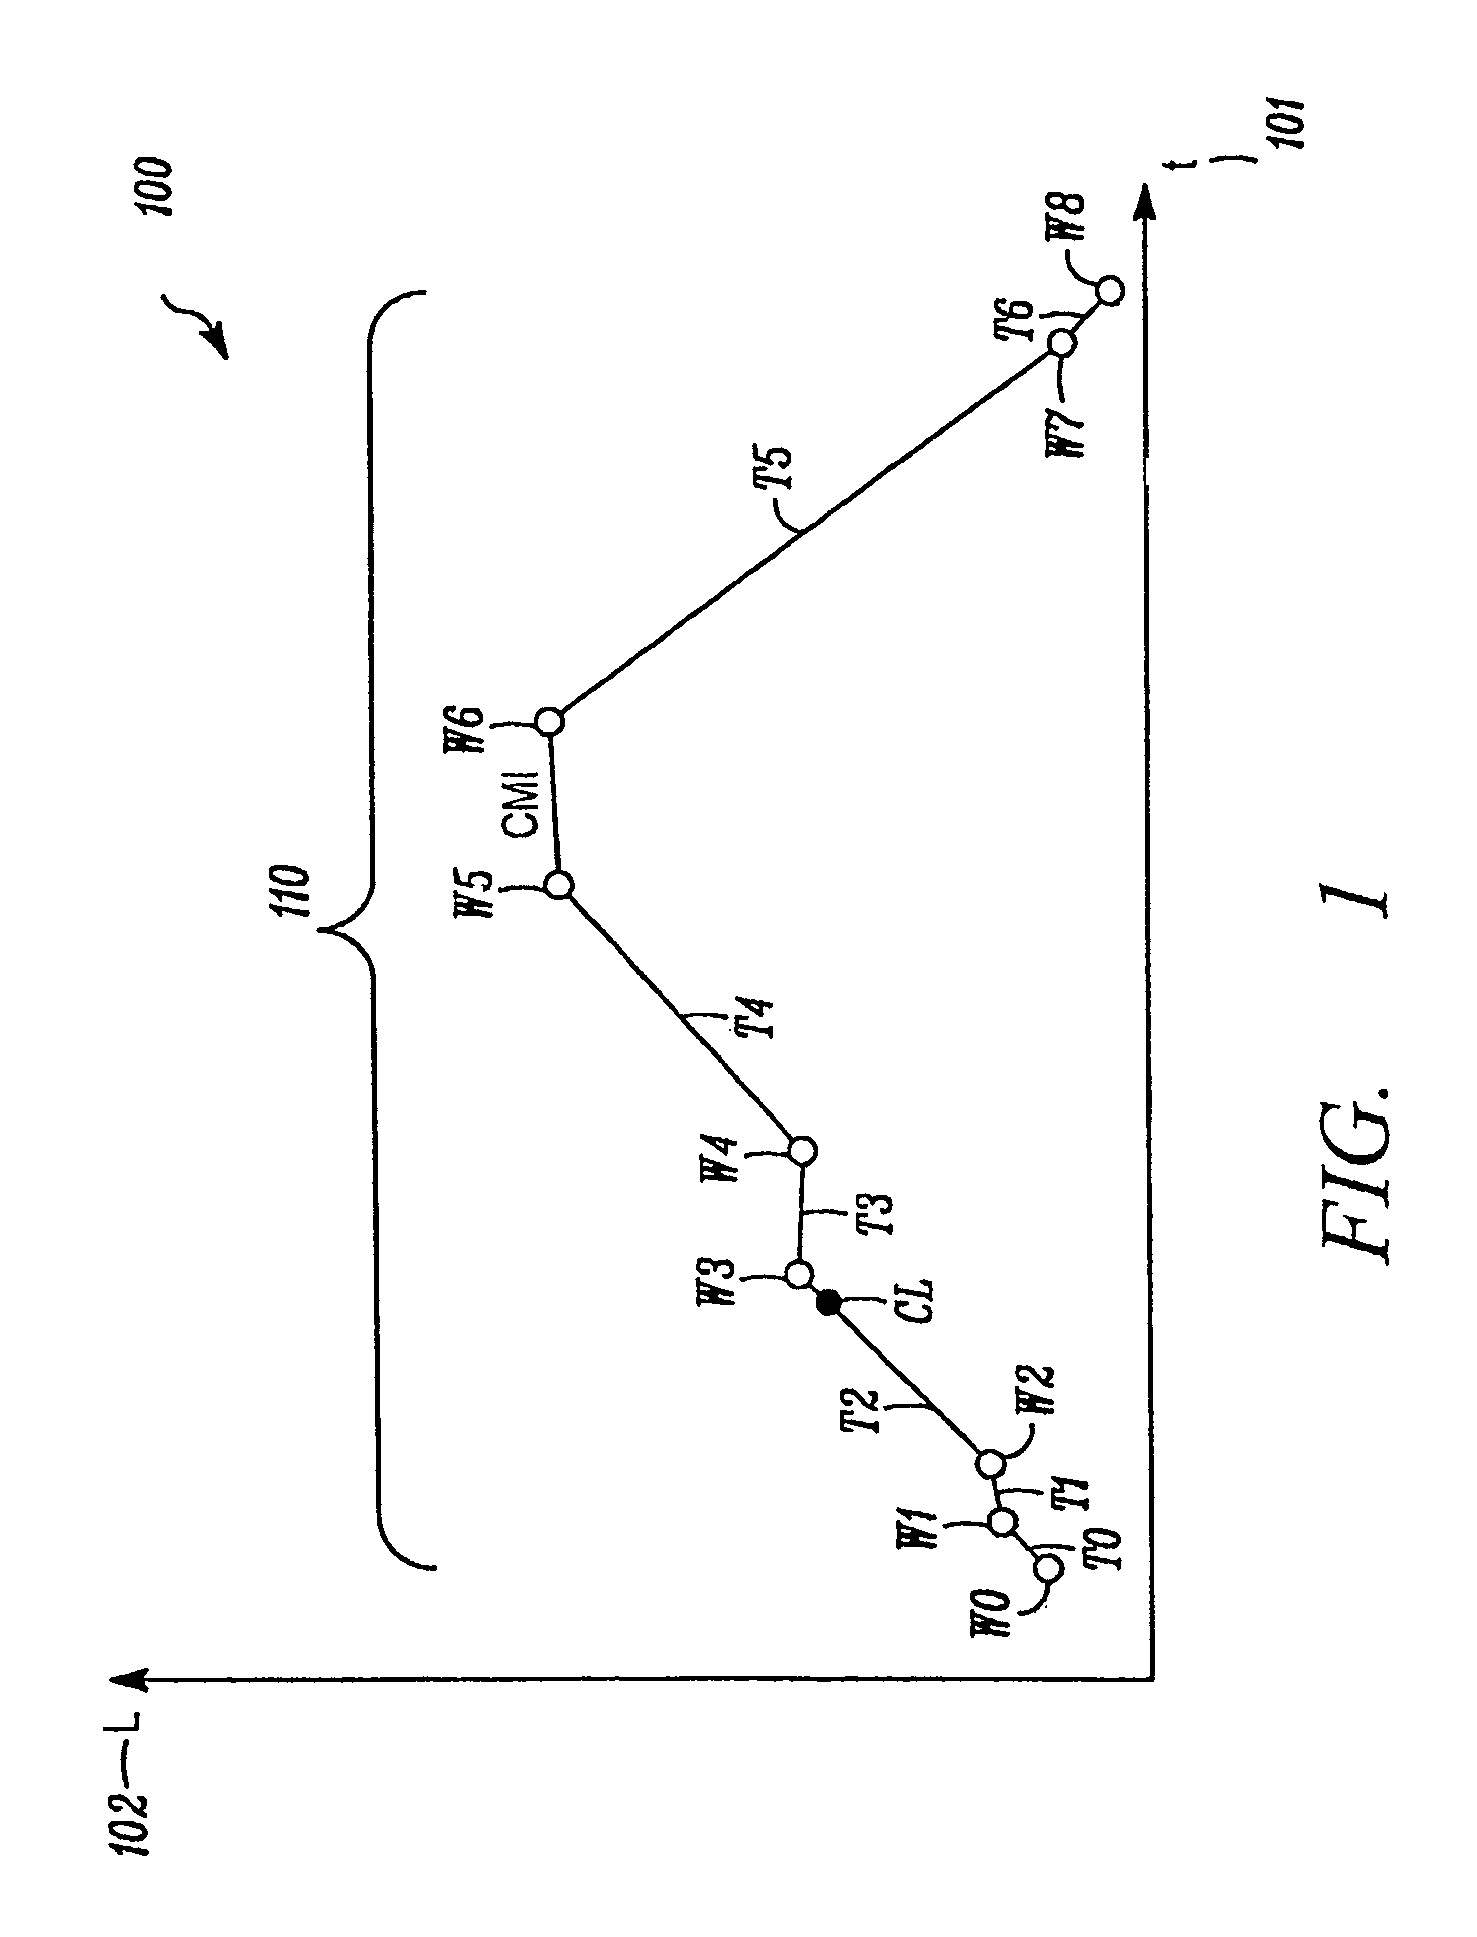 Method and system for resource planning for service provider